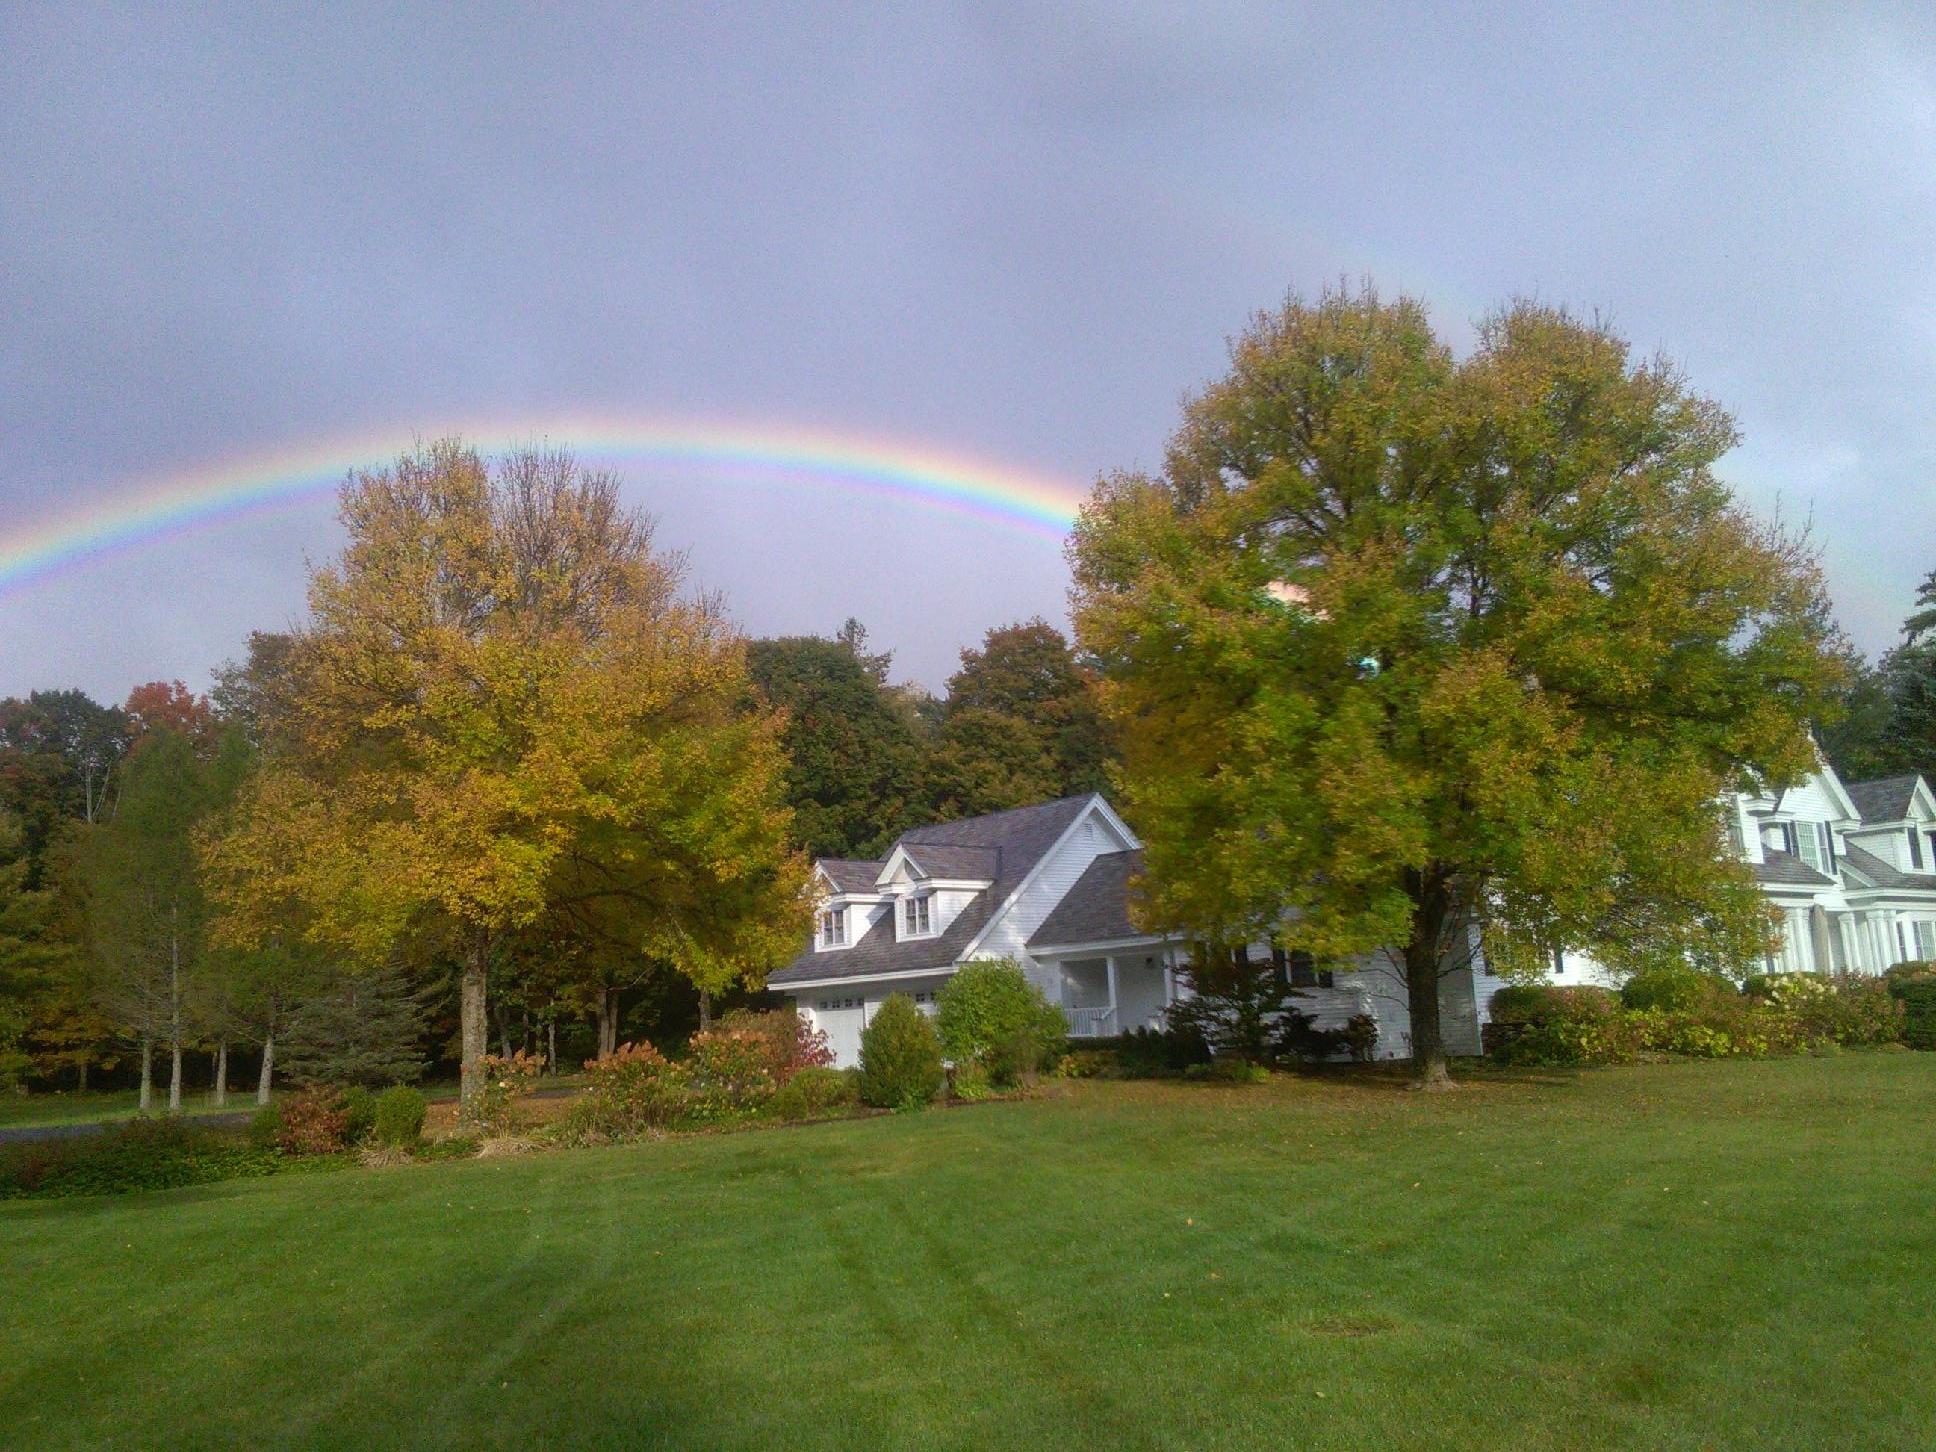 Picturesque rainbow over clients home and thriving green lawn